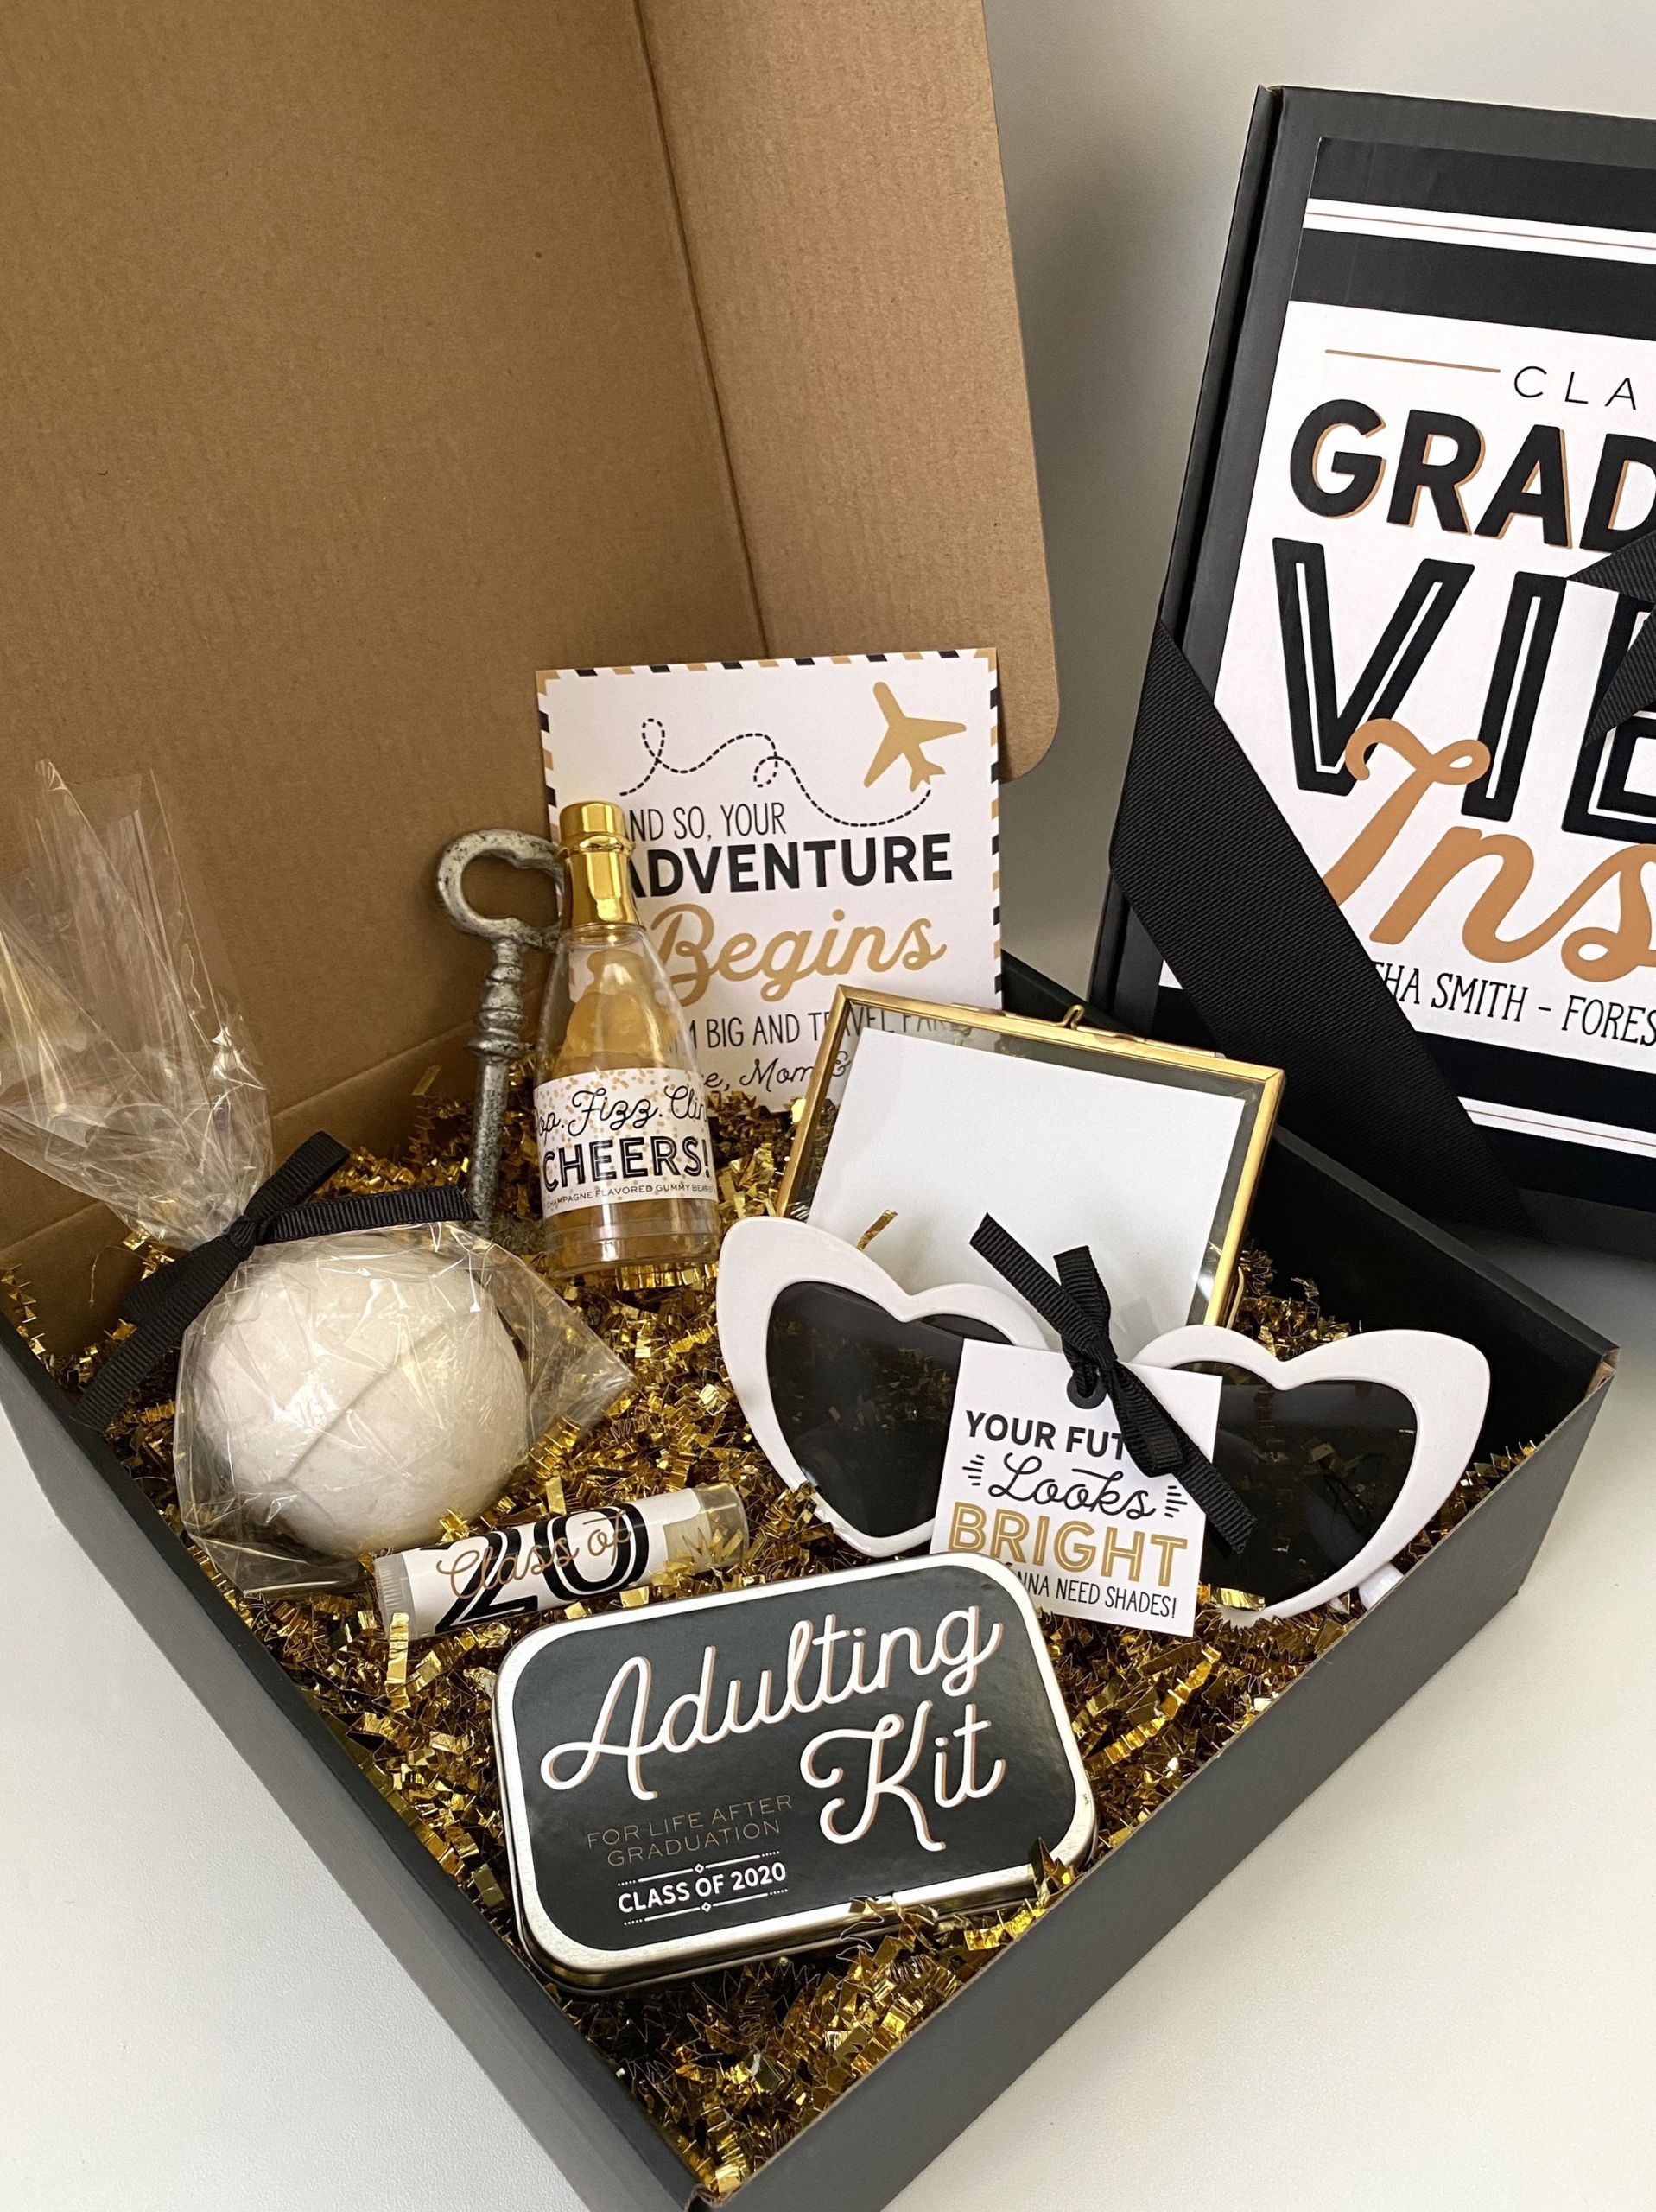 Gift Box Ideas For Girlfriend
 Class of 2020 Graduation Gift Box for Her High School